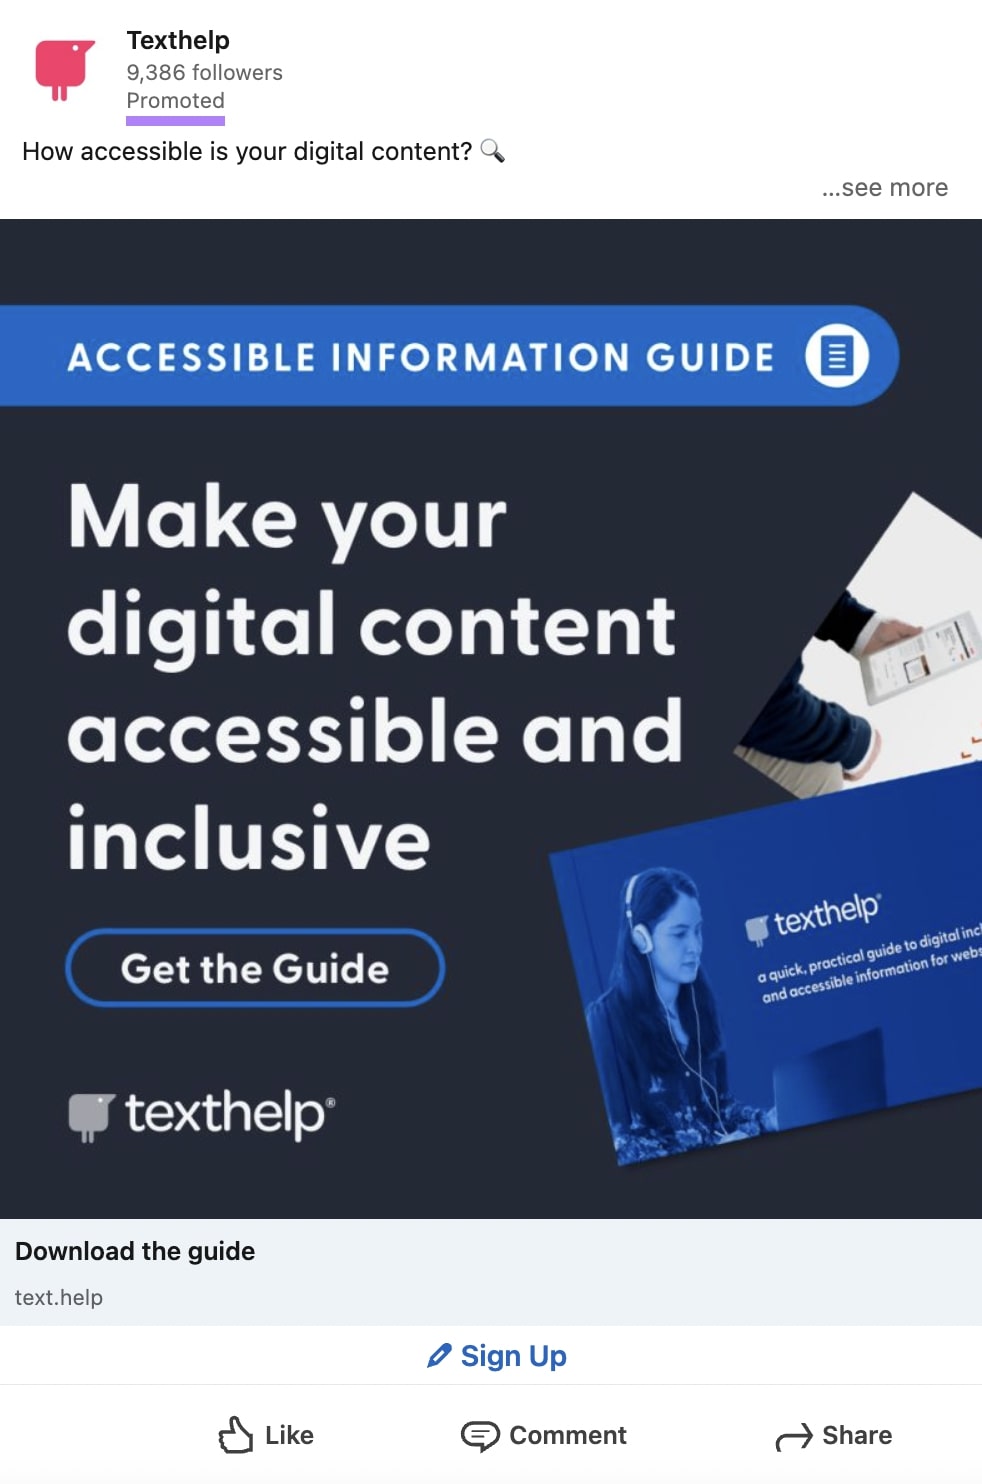 Texthelp native LinkedIn ad for an accessible information guide ready to download